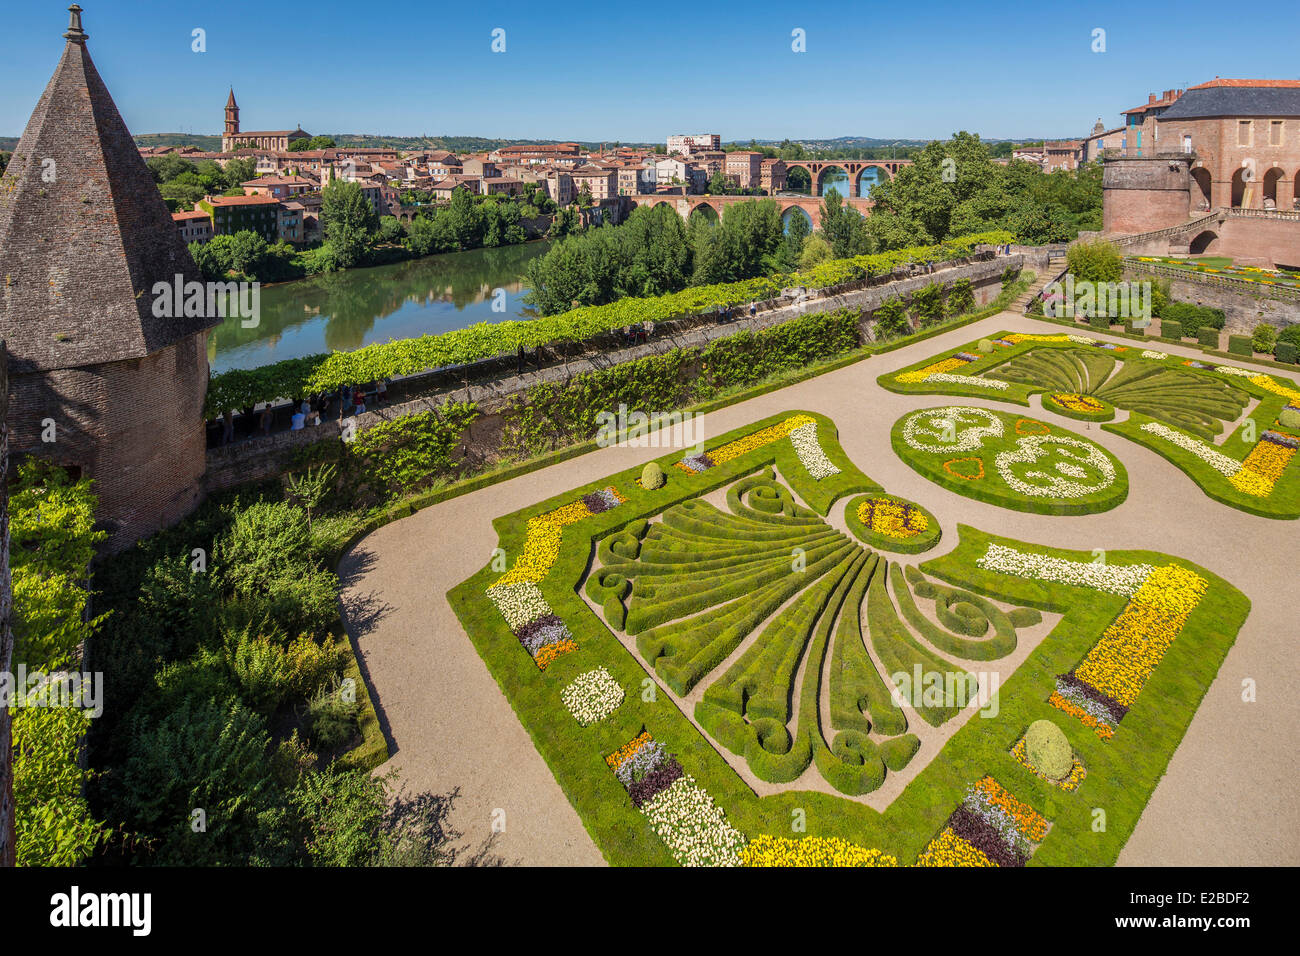 France, Tarn, Albi, episcopal city, listed as World Heritage by UNESCO, gardens in Palais de la Berbie over river Tarn Stock Photo